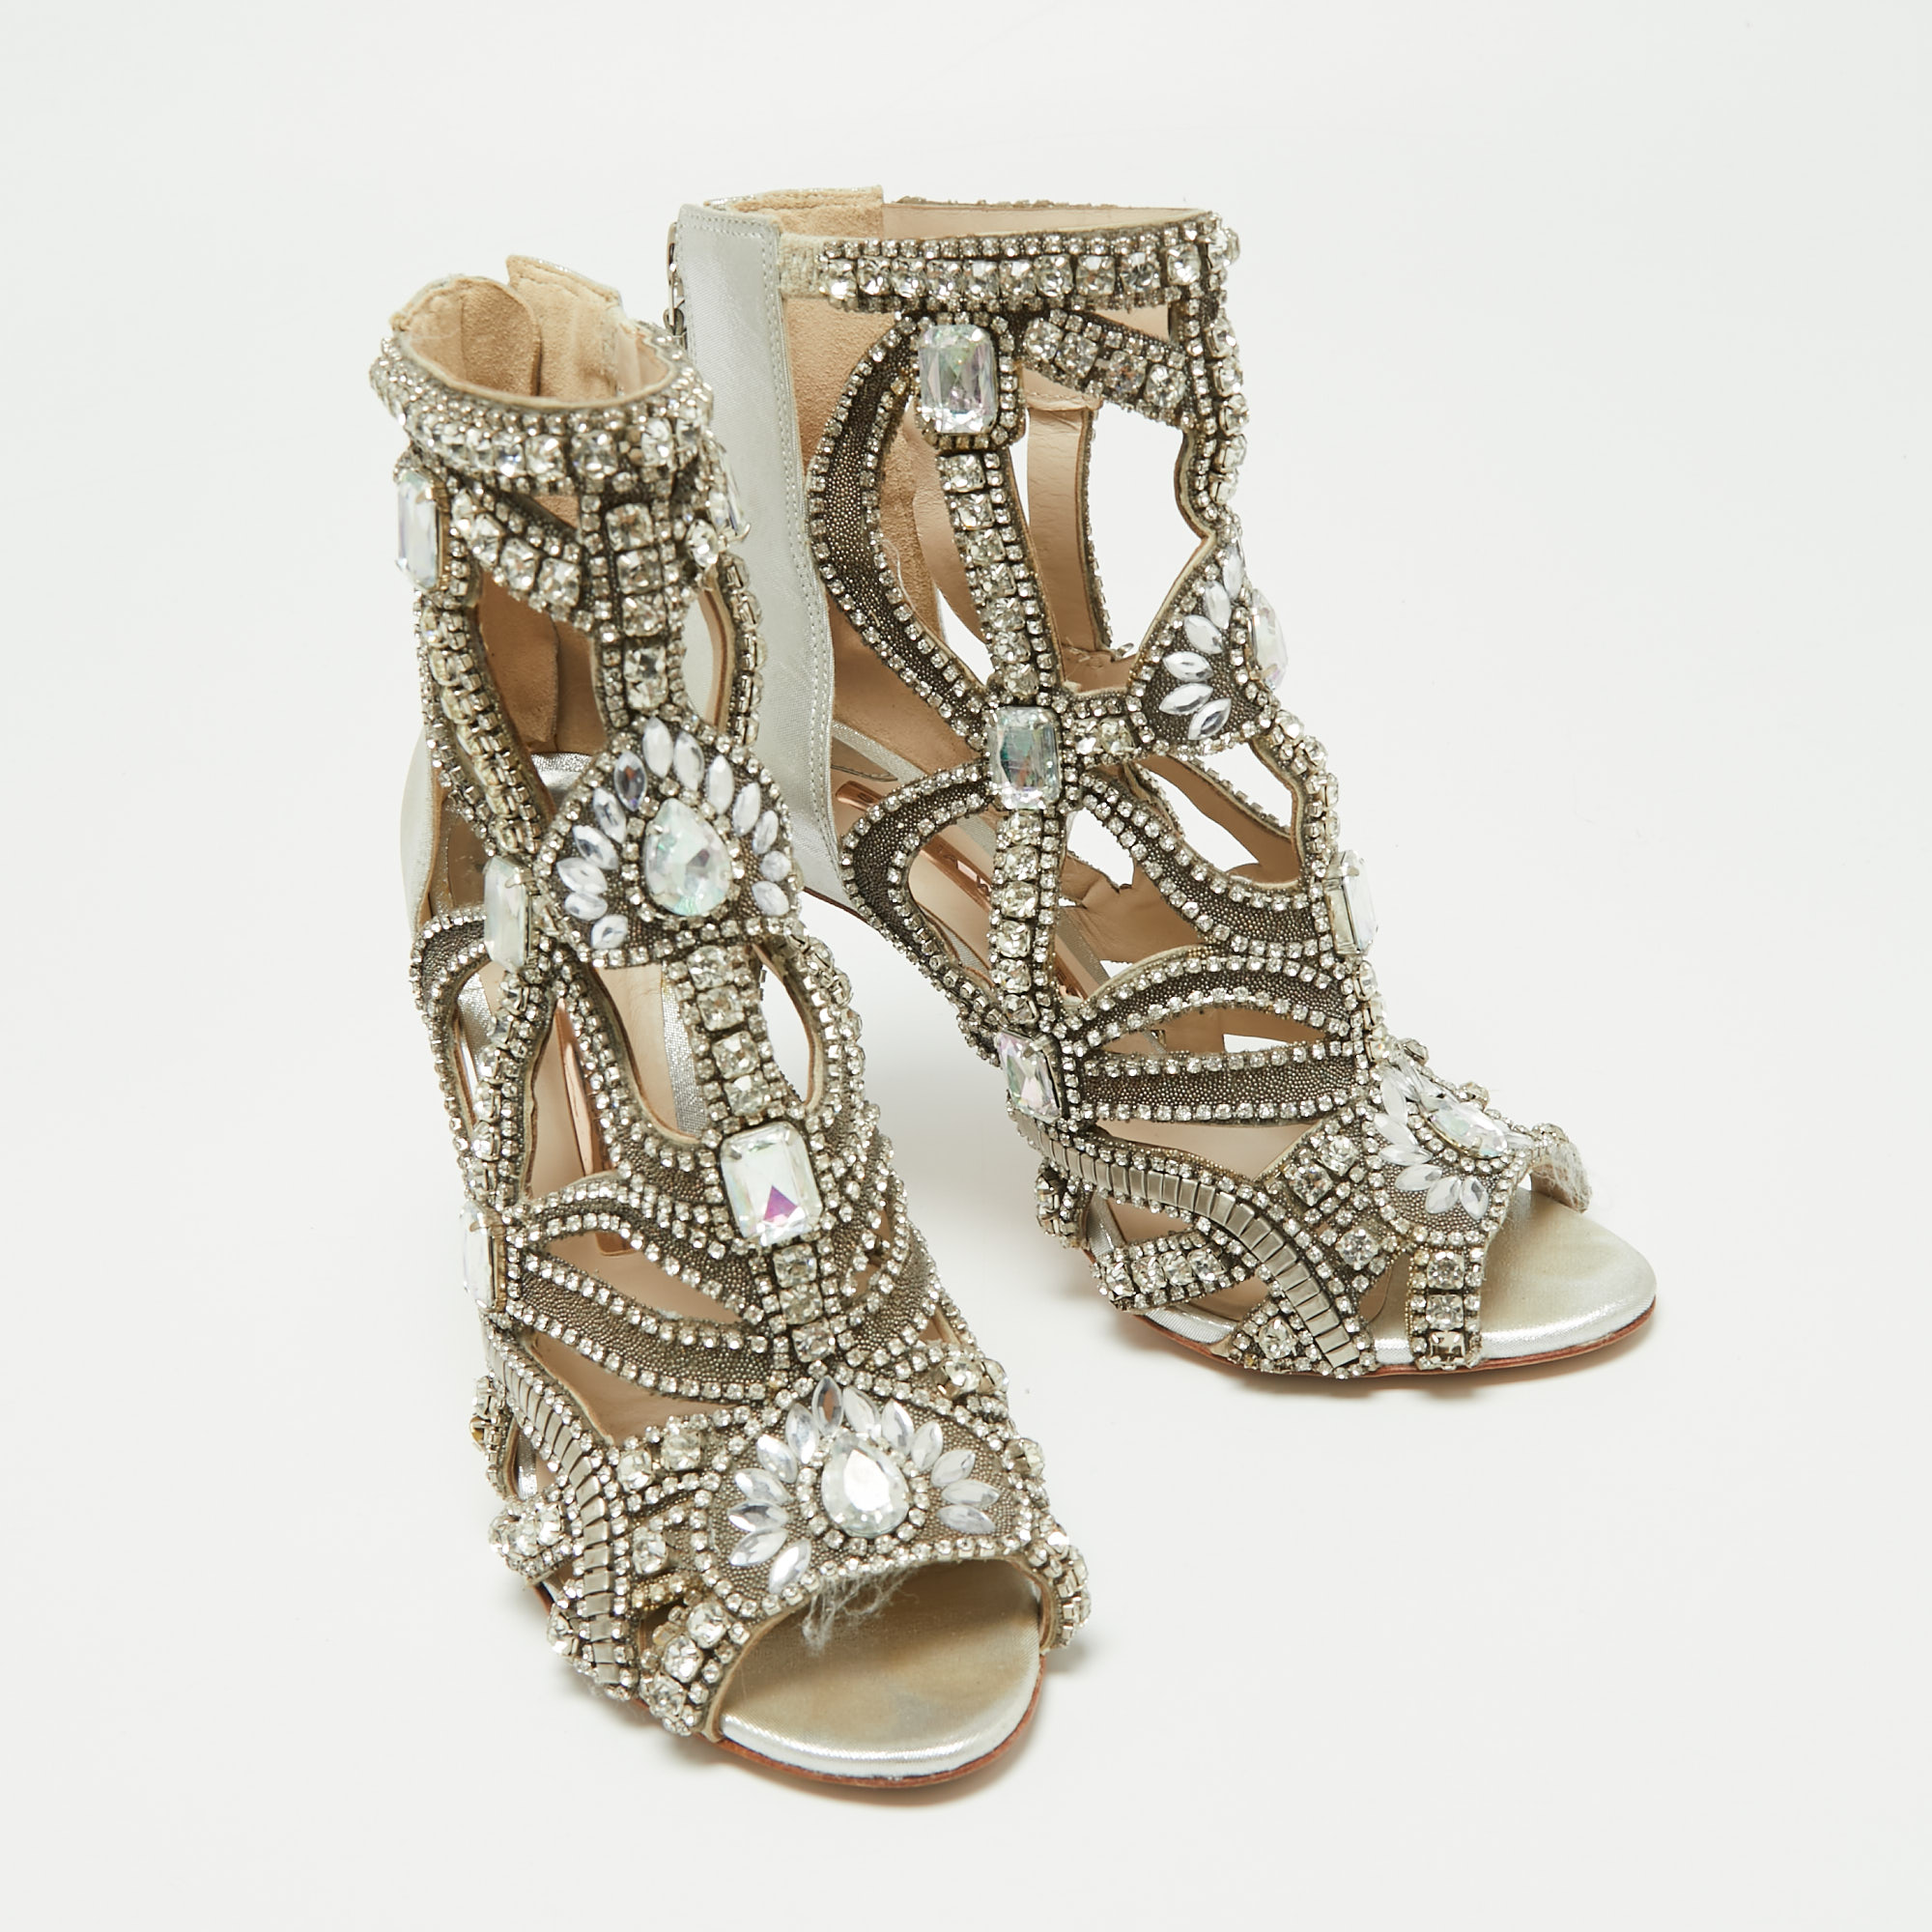 Sophia Webster Silver Fabric And Leather Crystal Embellished Iridessa Caged Booties Size 36